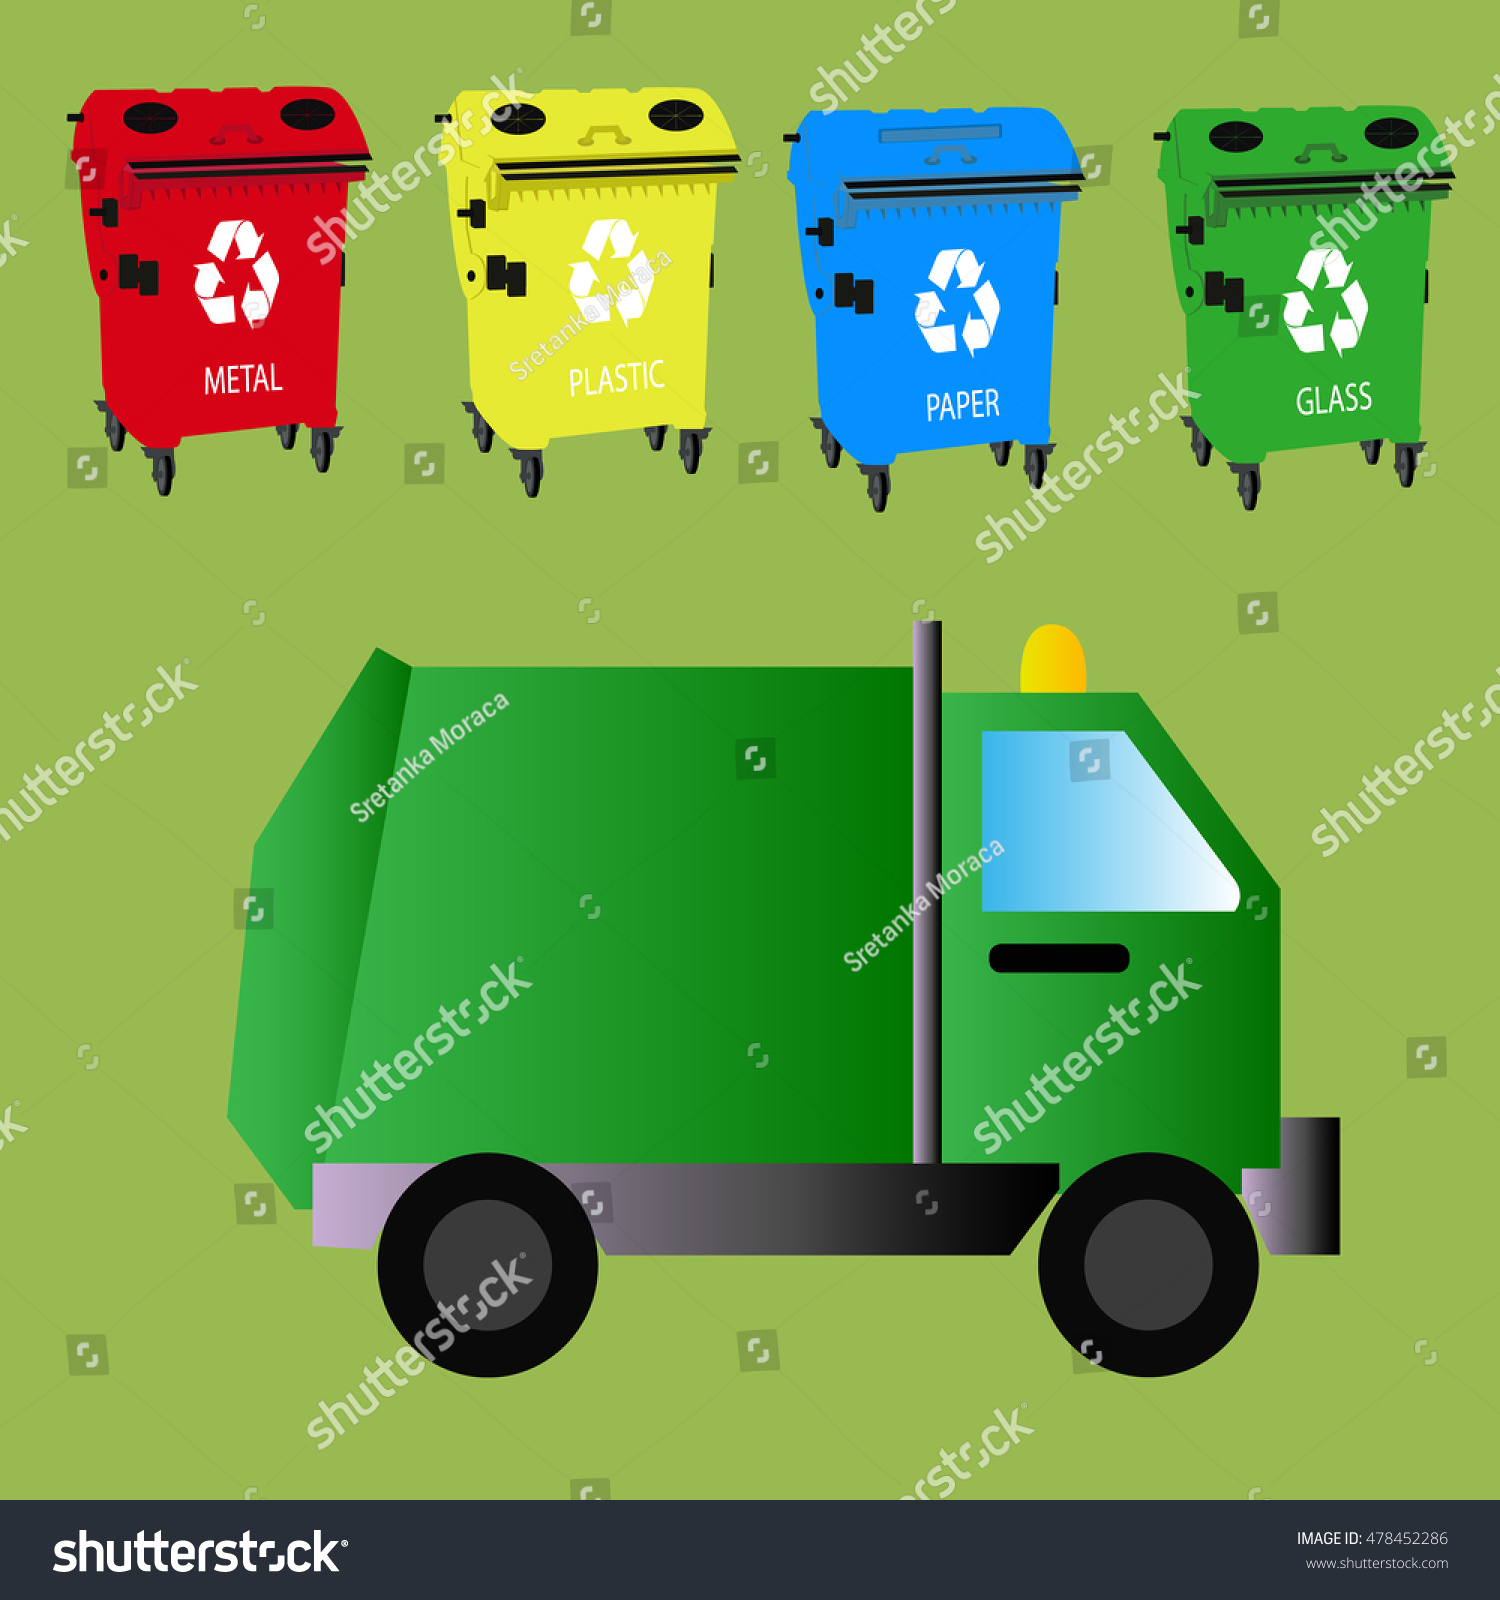 SVG of Garbage truck transporting colored recycle waste bins with paper, glass, plastic, metal. Garbage tipper with trash. Waste recycling concept. Cargo truck. Vector illustration in flat style design. svg